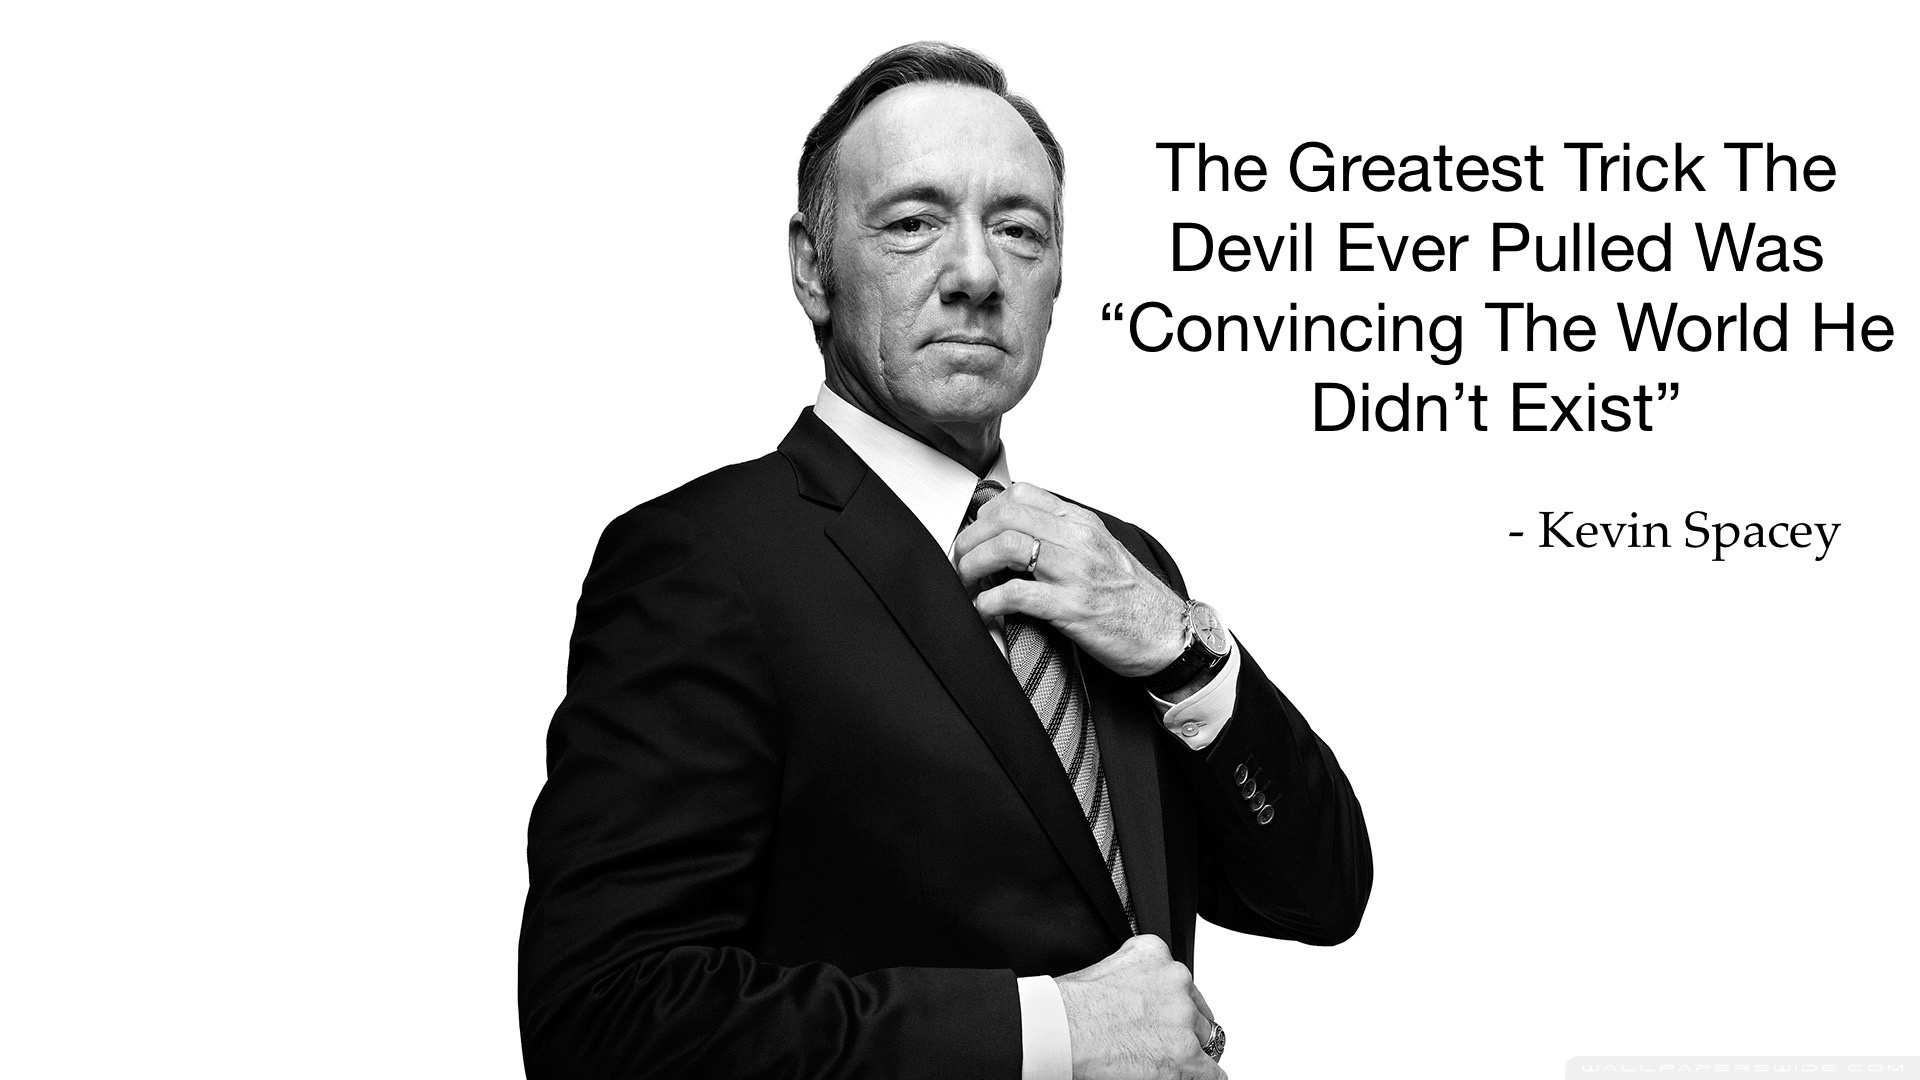 The Usual Suspects Quotes Devil - slidesharetrick